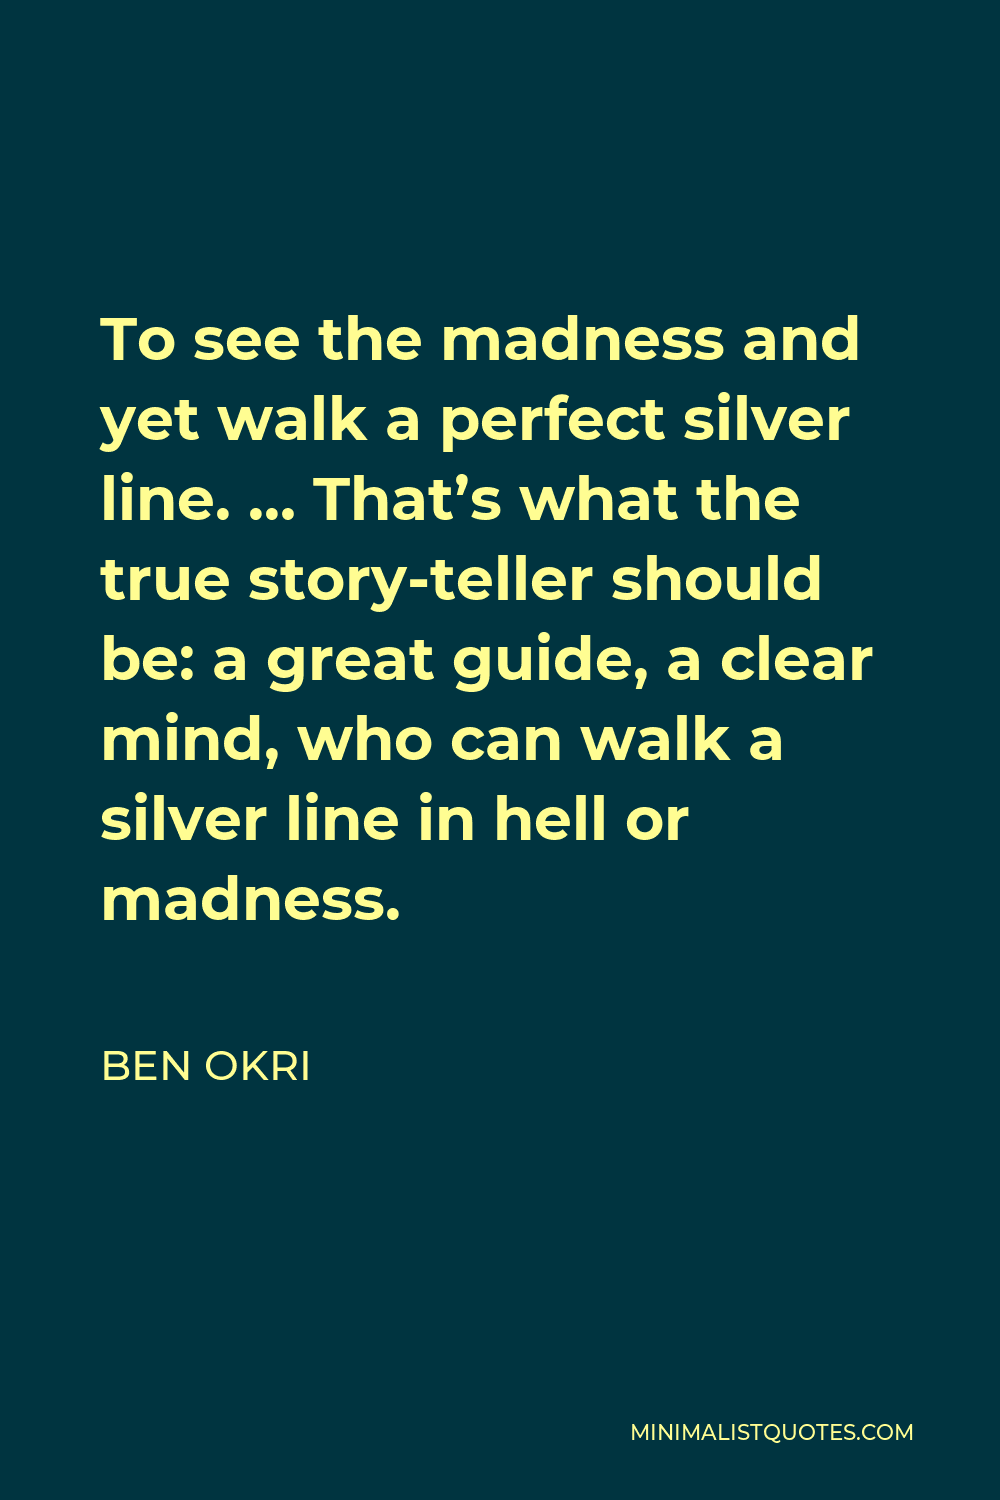 Ben Okri Quote - To see the madness and yet walk a perfect silver line. … That’s what the true story-teller should be: a great guide, a clear mind, who can walk a silver line in hell or madness.